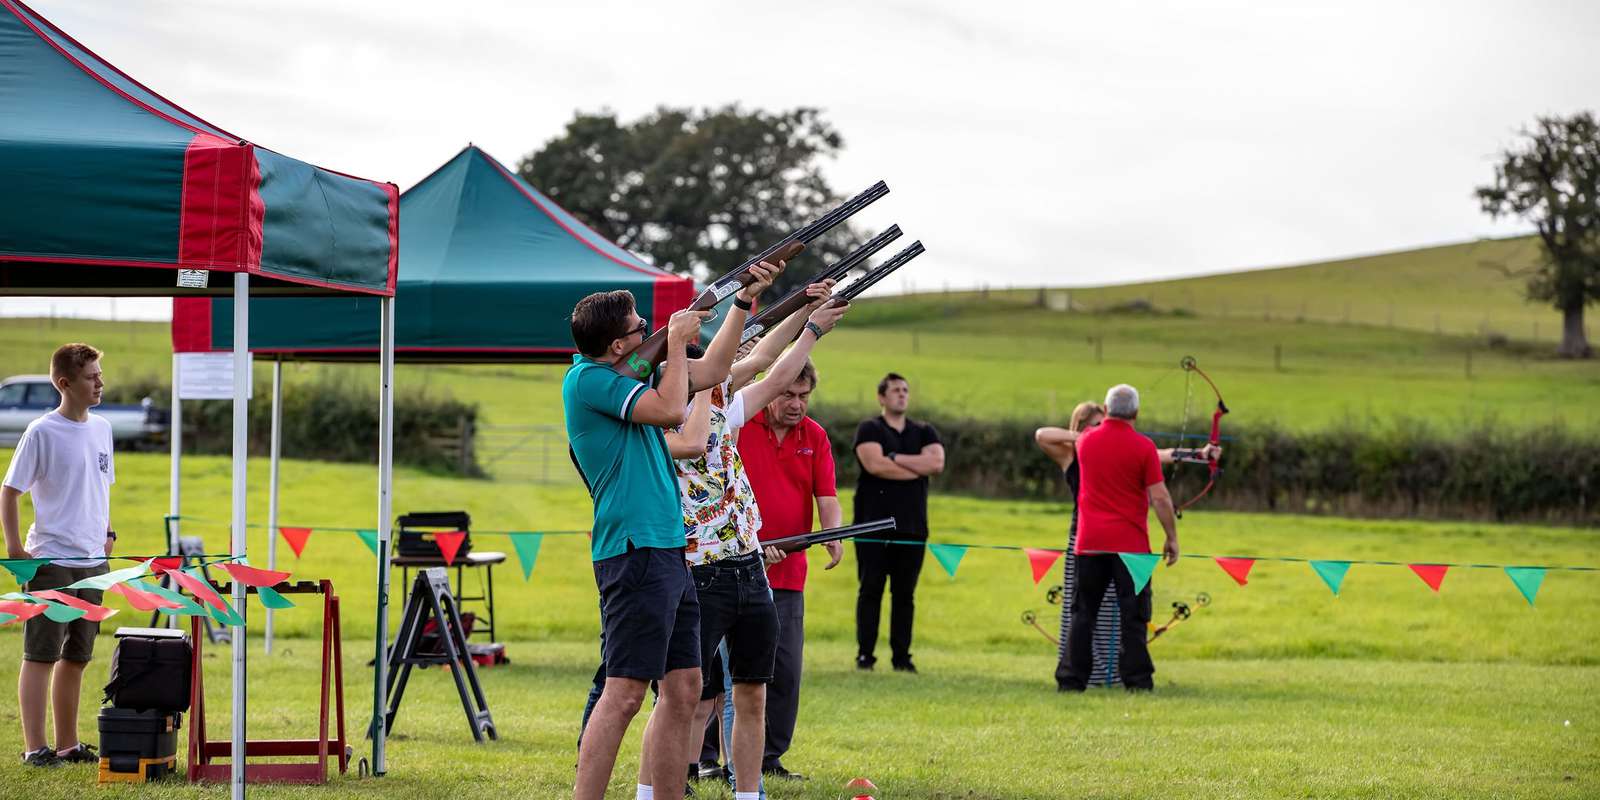 Laser clay shooting Outdoor venue games for corporate family fun days